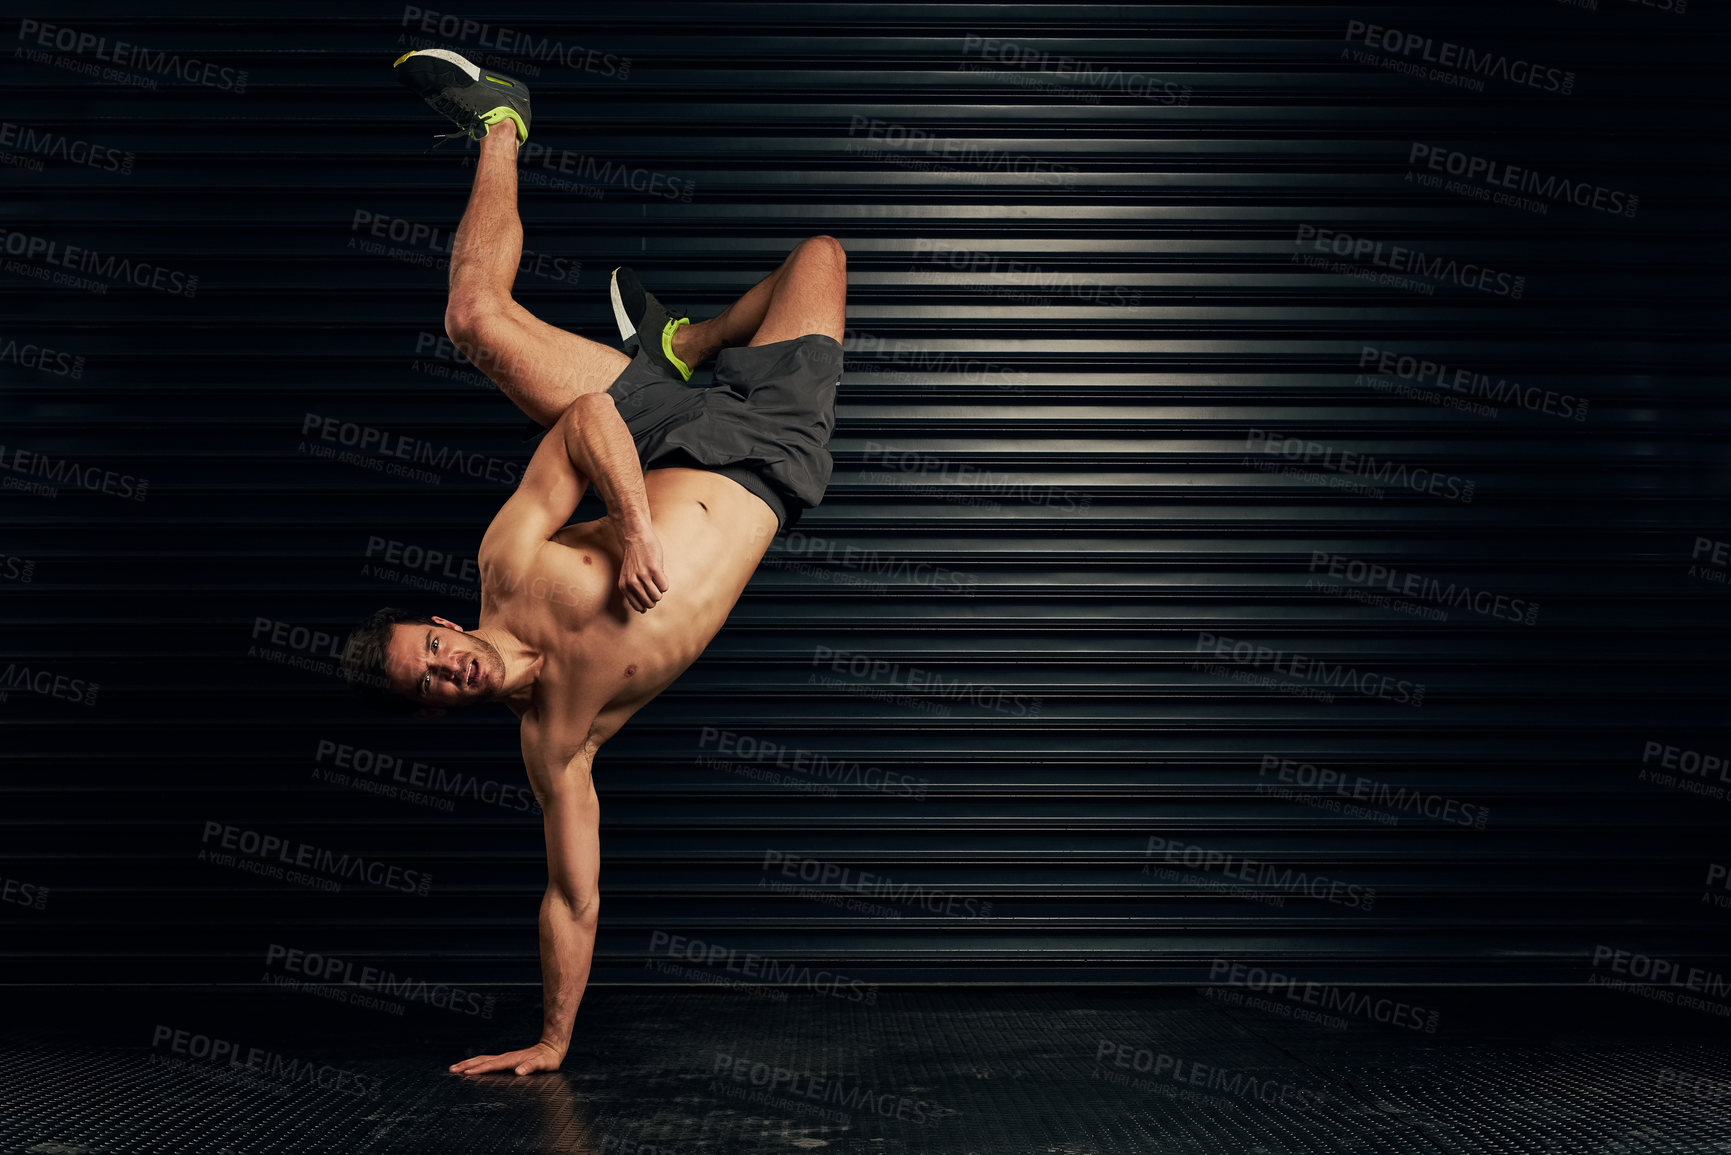 Buy stock photo Studio portrait of a shirtless and well built man breakdancing against a dark background